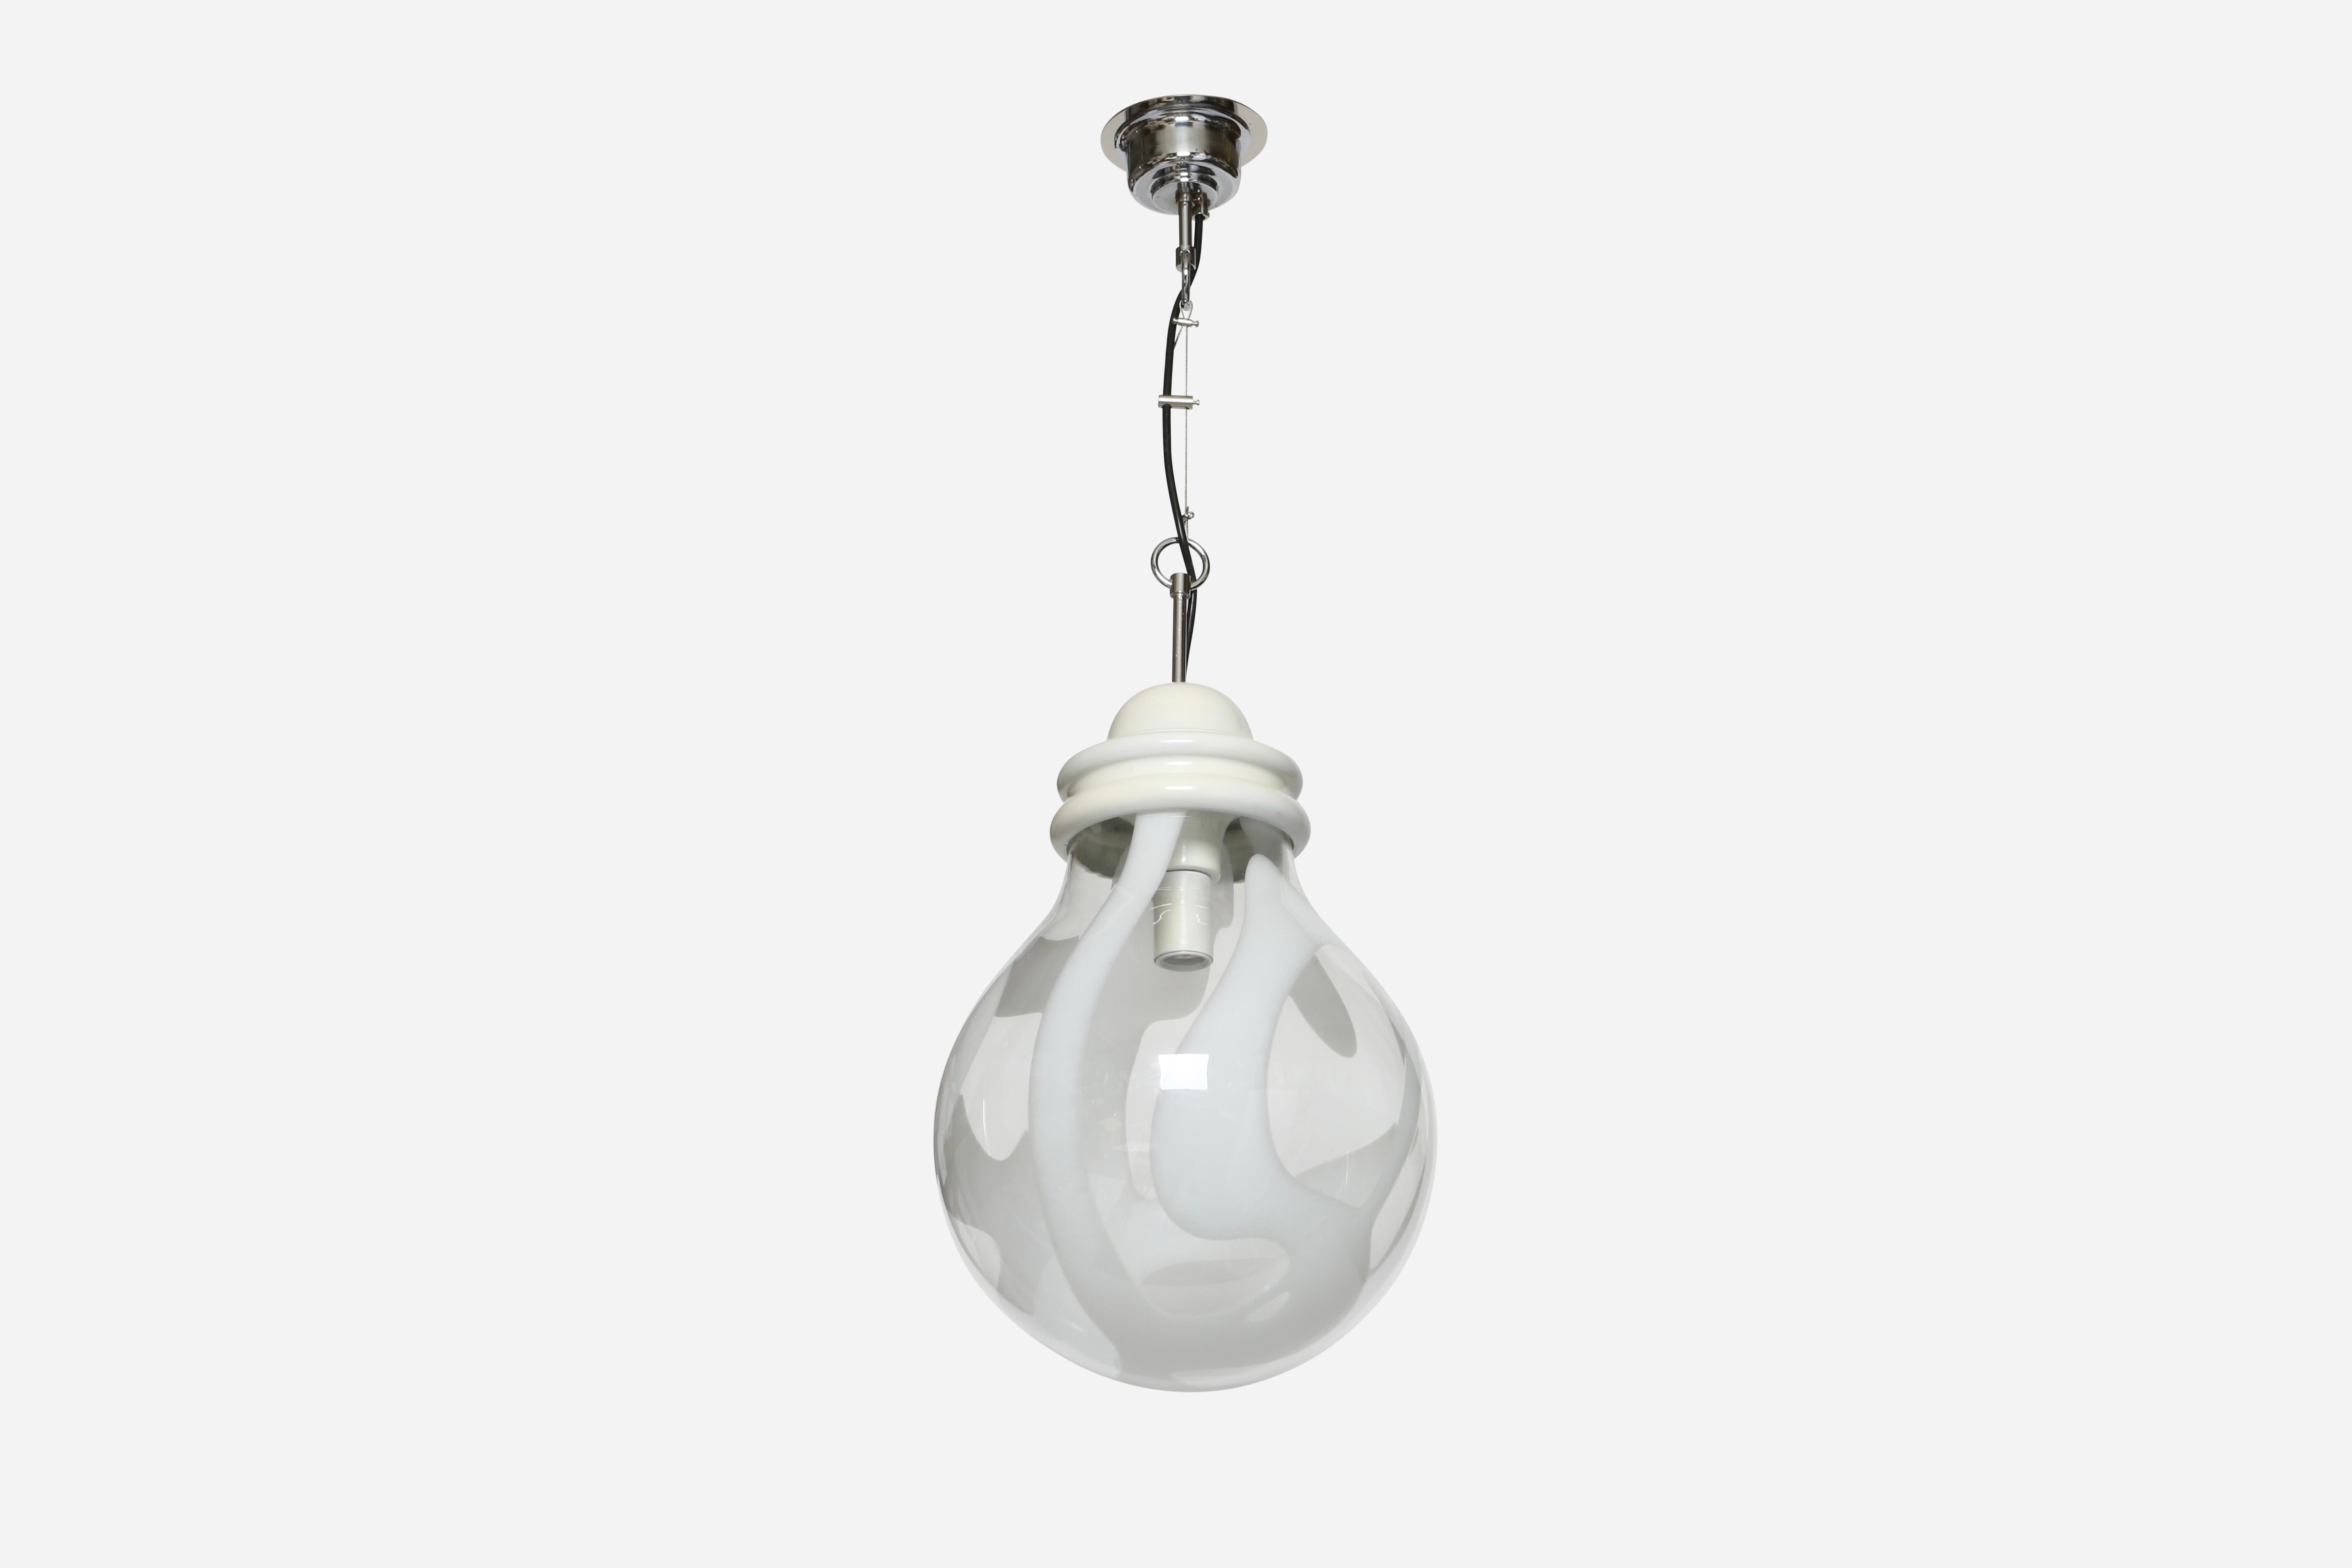 Murano glass ceiling pendant.
Glass, metal.
Rewired for US.
Overall drop is adjustable, can be made longer or shorter.
Height of the glass diffuser is.... inches
Italy, 1970s.
Body of the pendant is 19 inches.

 